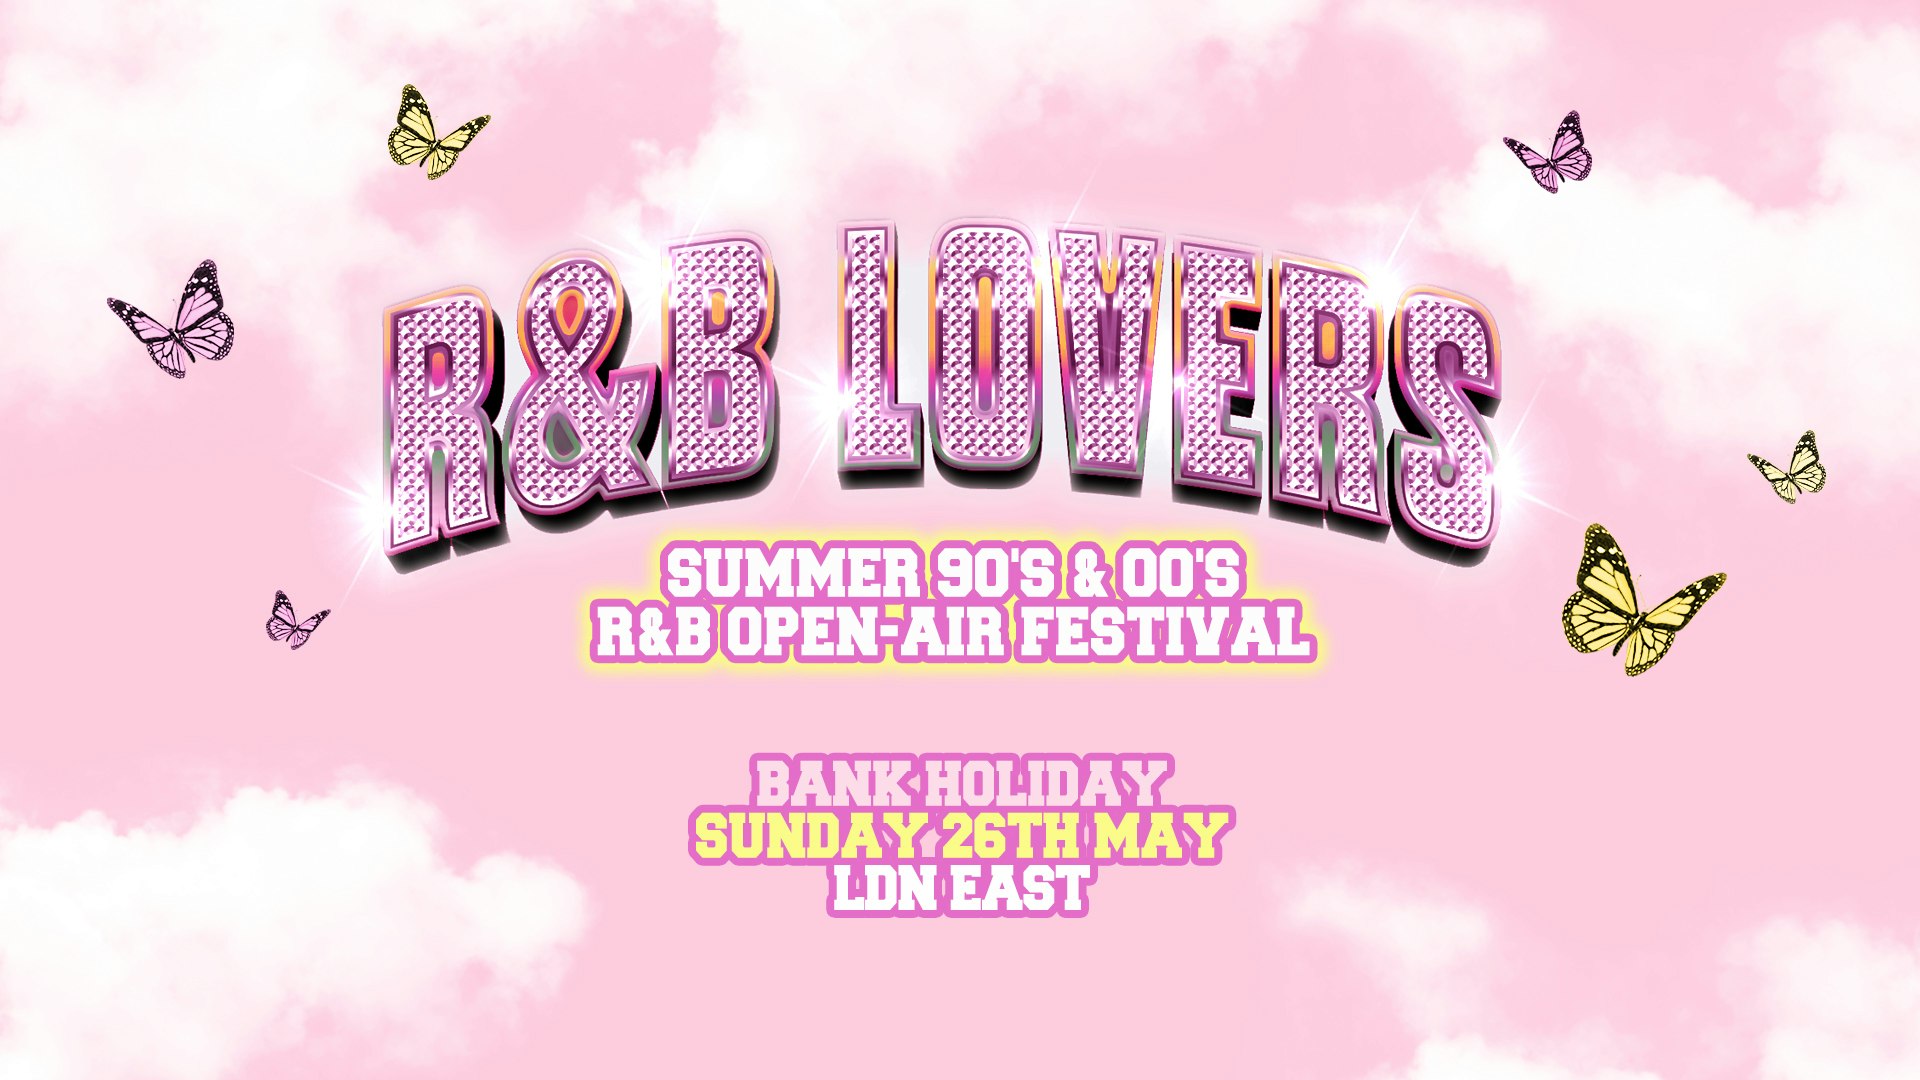 R&B Lovers Summer Open Air Festival – Sunday 26th May – LDN East [LAST 150 TICKETS!]